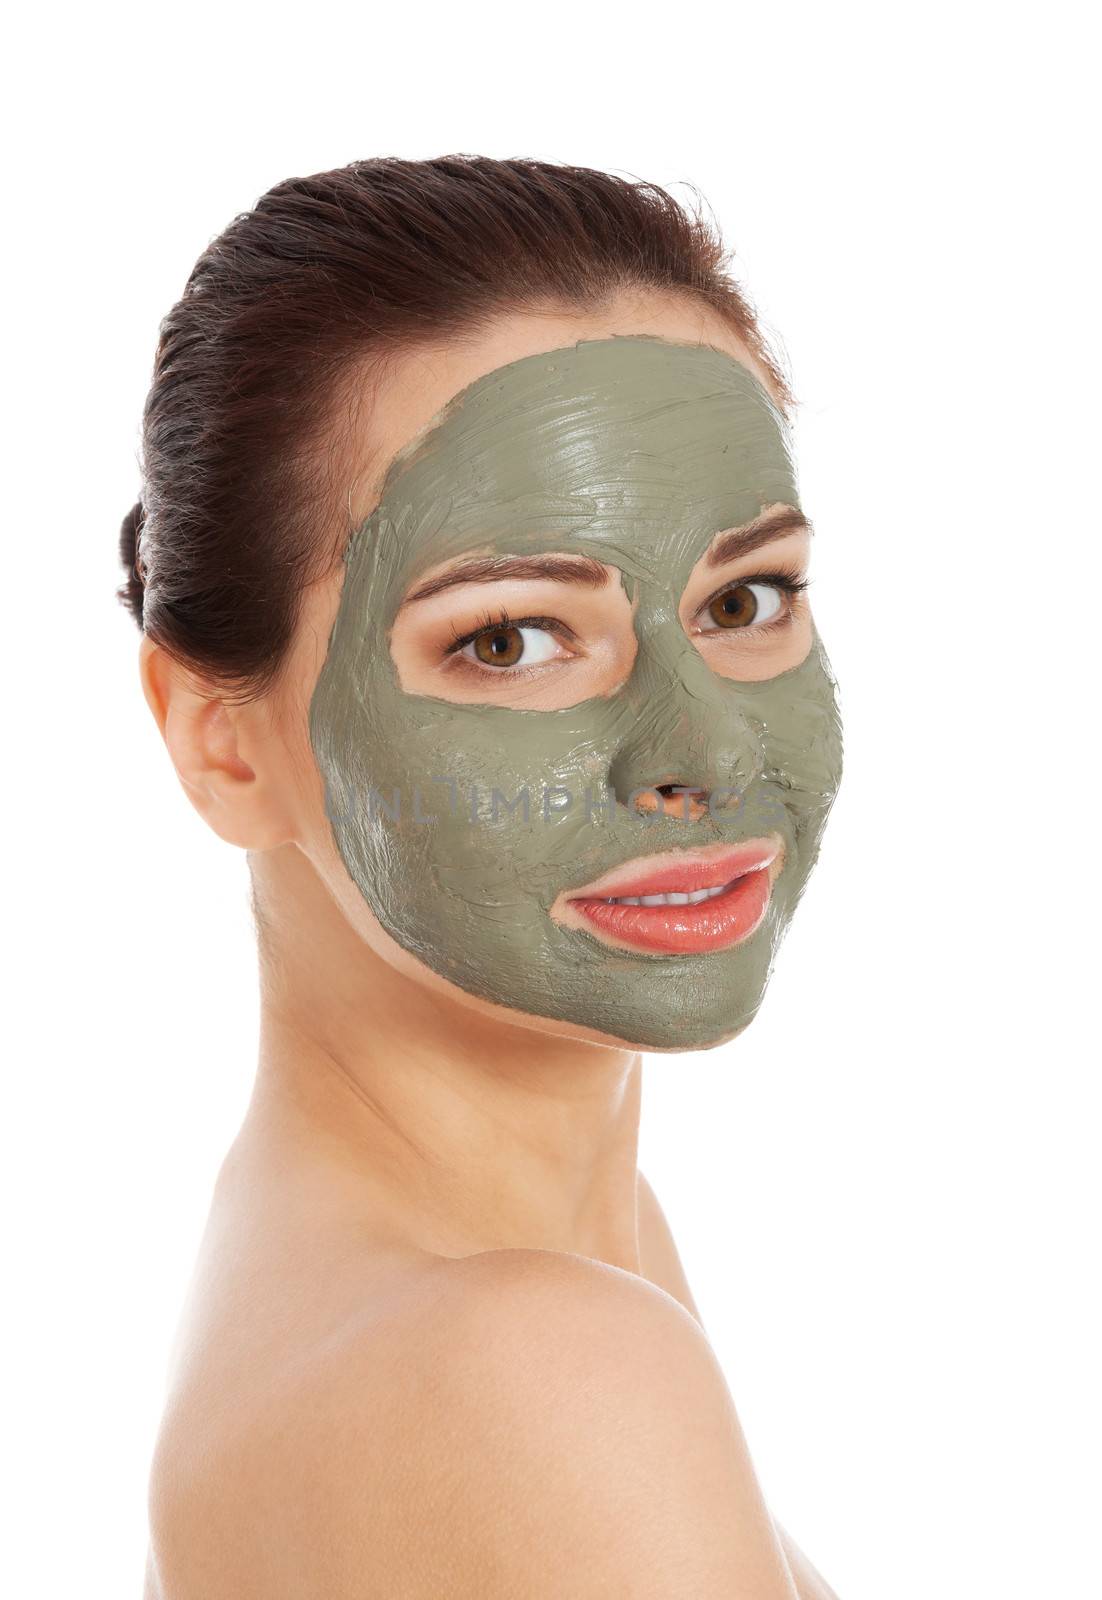 Beautifu toplessl woman with facial mask. Spa concept. Isolated on white.